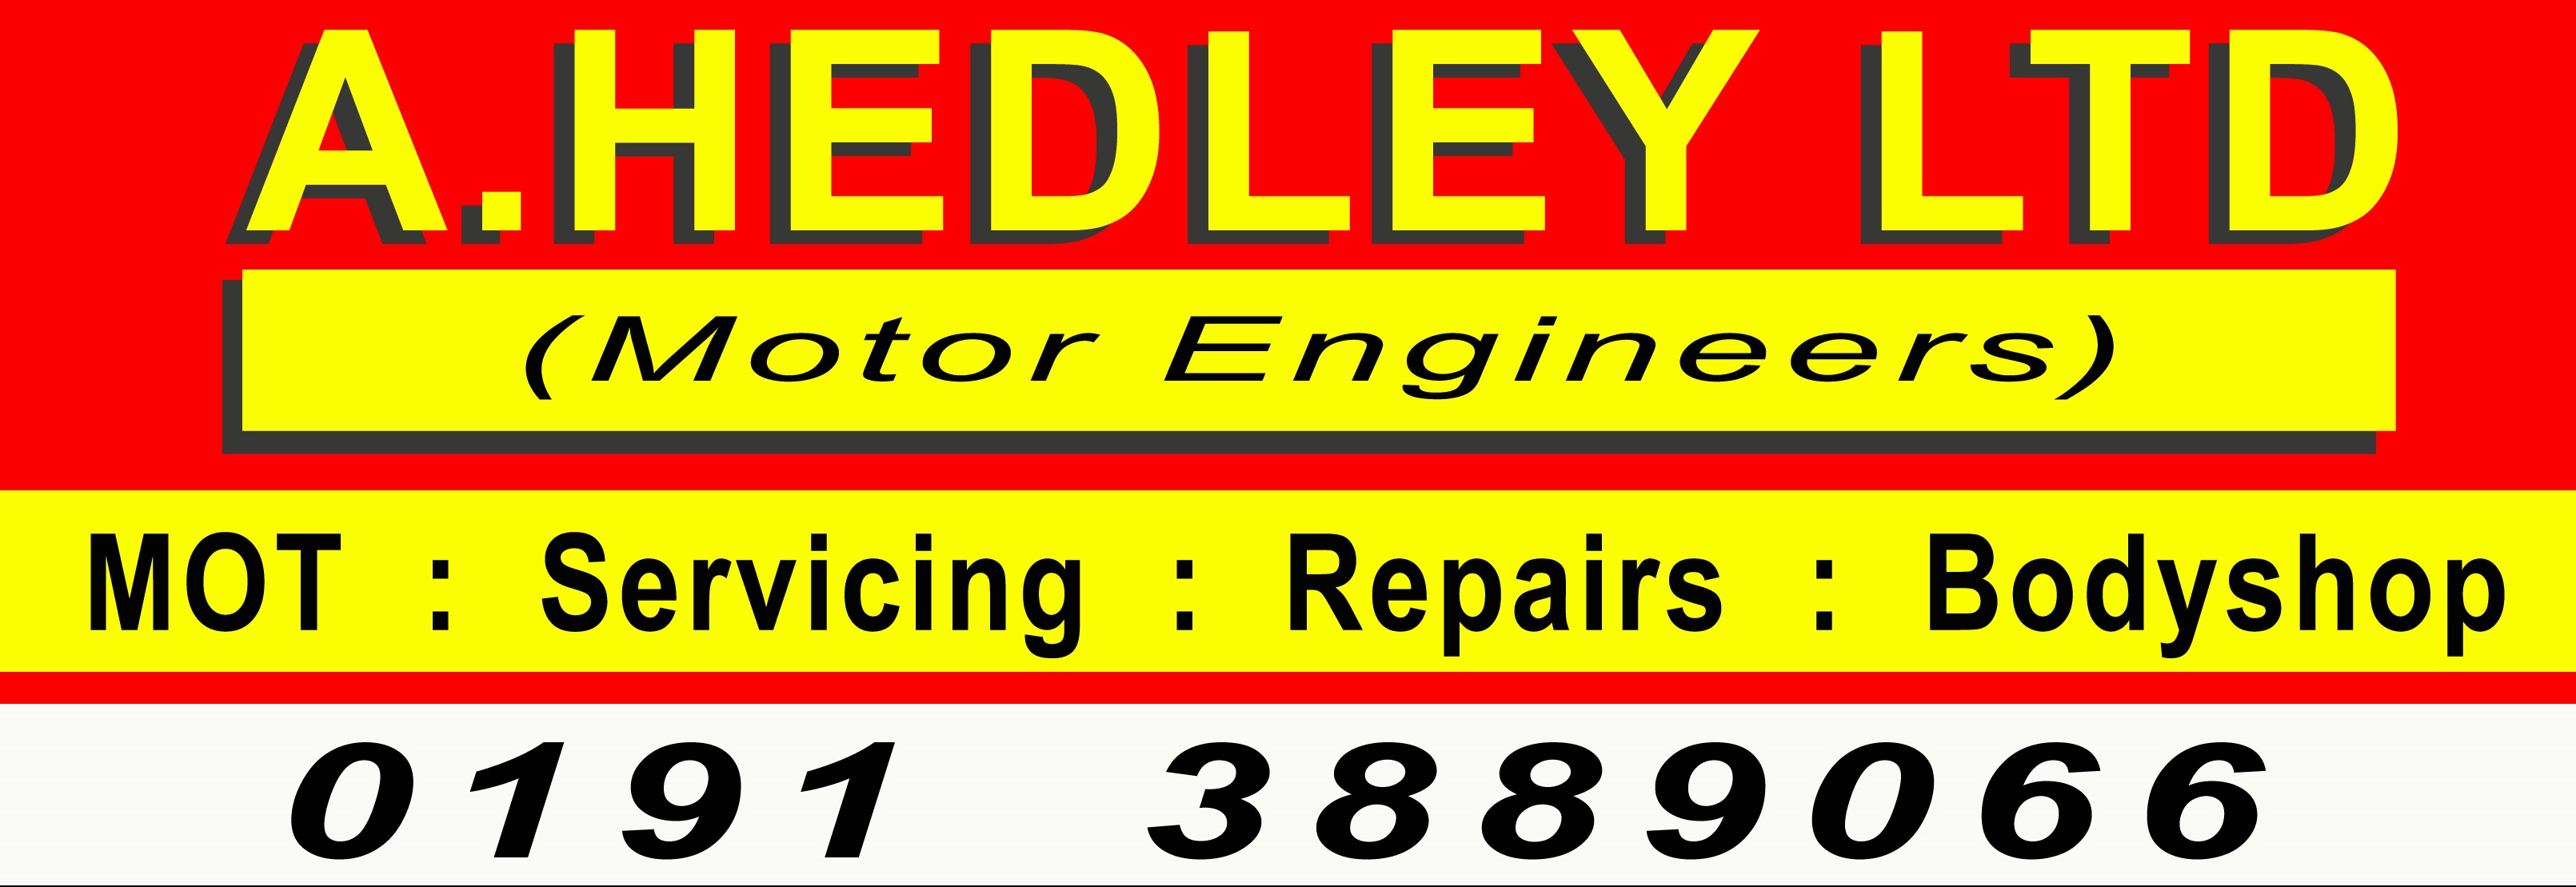 A HEDLEY (MOTOR ENGINEERS) LTD | CHESTER LE STREET